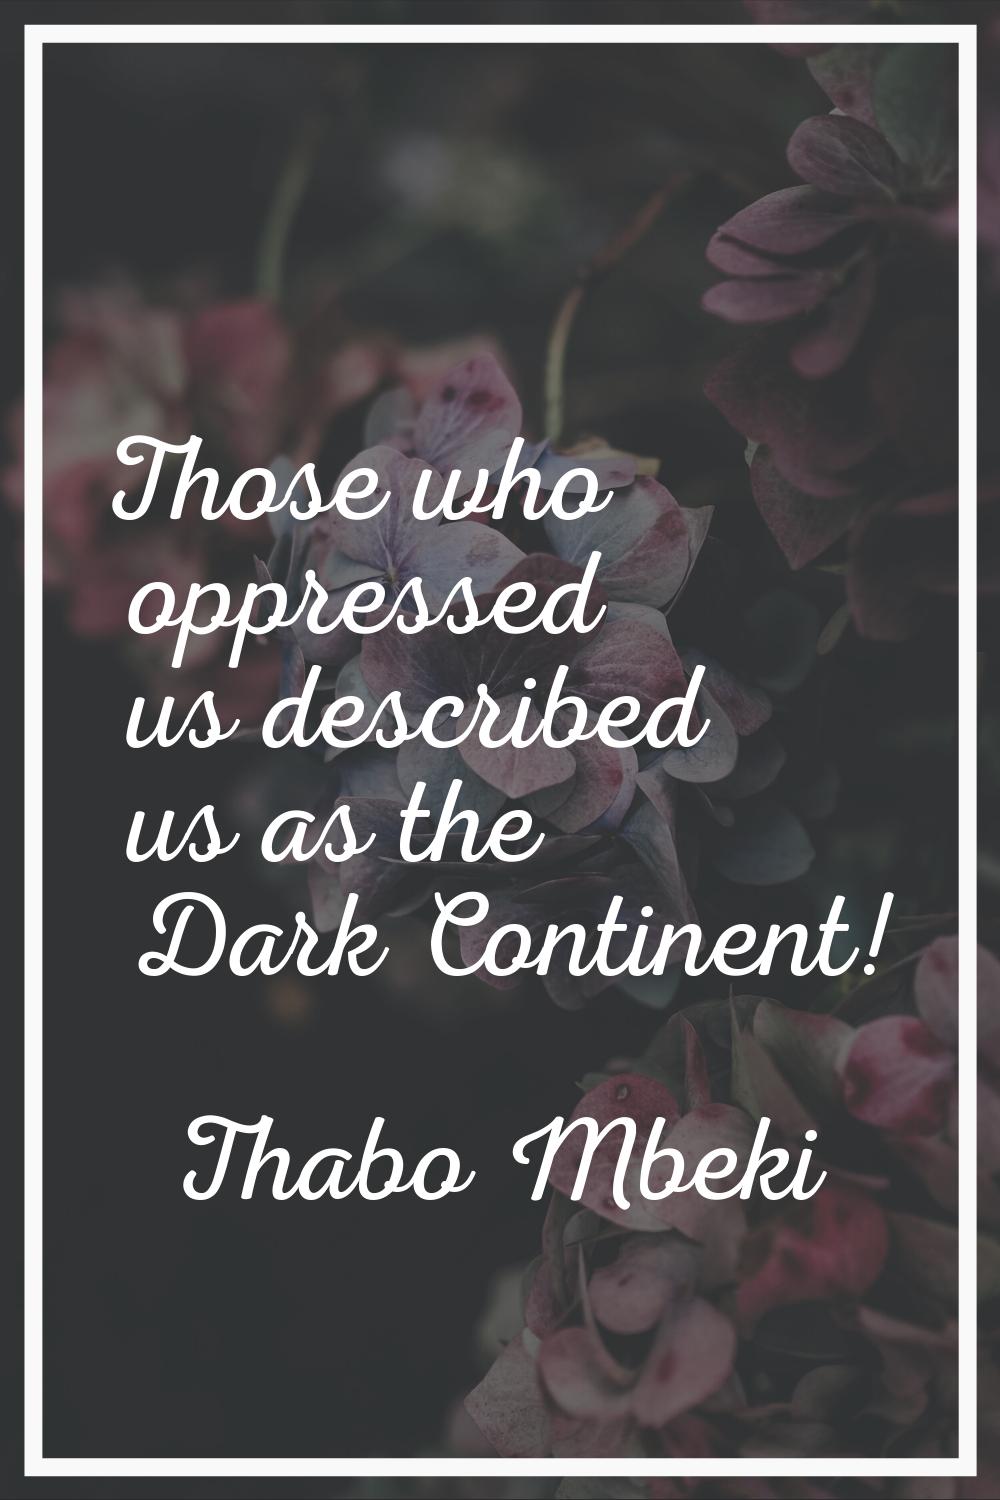 Those who oppressed us described us as the Dark Continent!